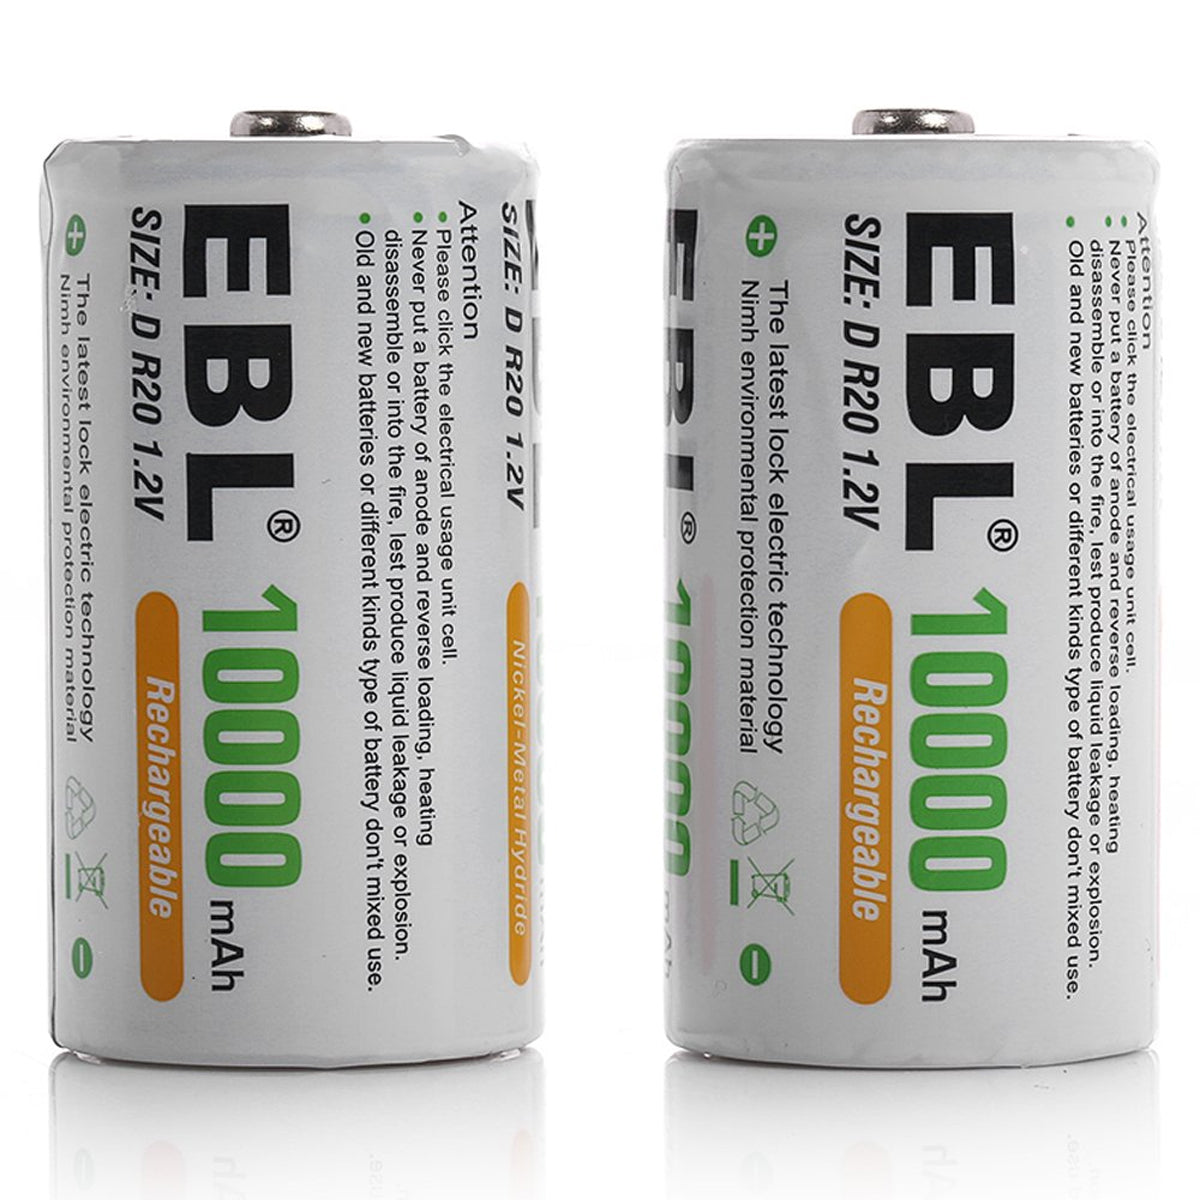 EBL Rechargeable D Batteries, 10000mAh Ni-MH High Capacity D Cell Battery,  4 Pack